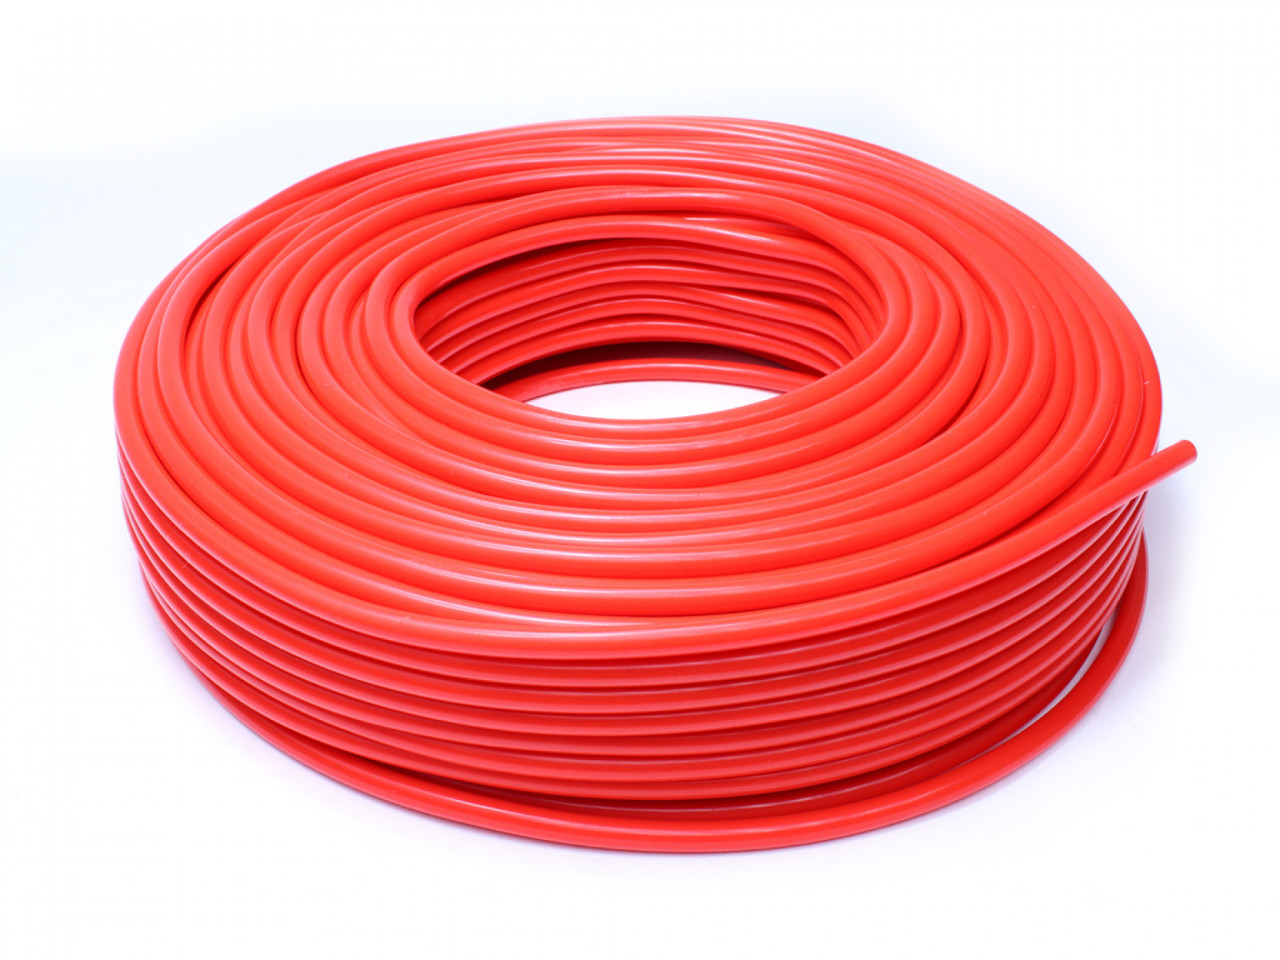 HPS 1/8" (3mm) ID Red High Temp Silicone Vacuum Hose - 100 Feet Pack (HPS-HTSVH3-REDx100)